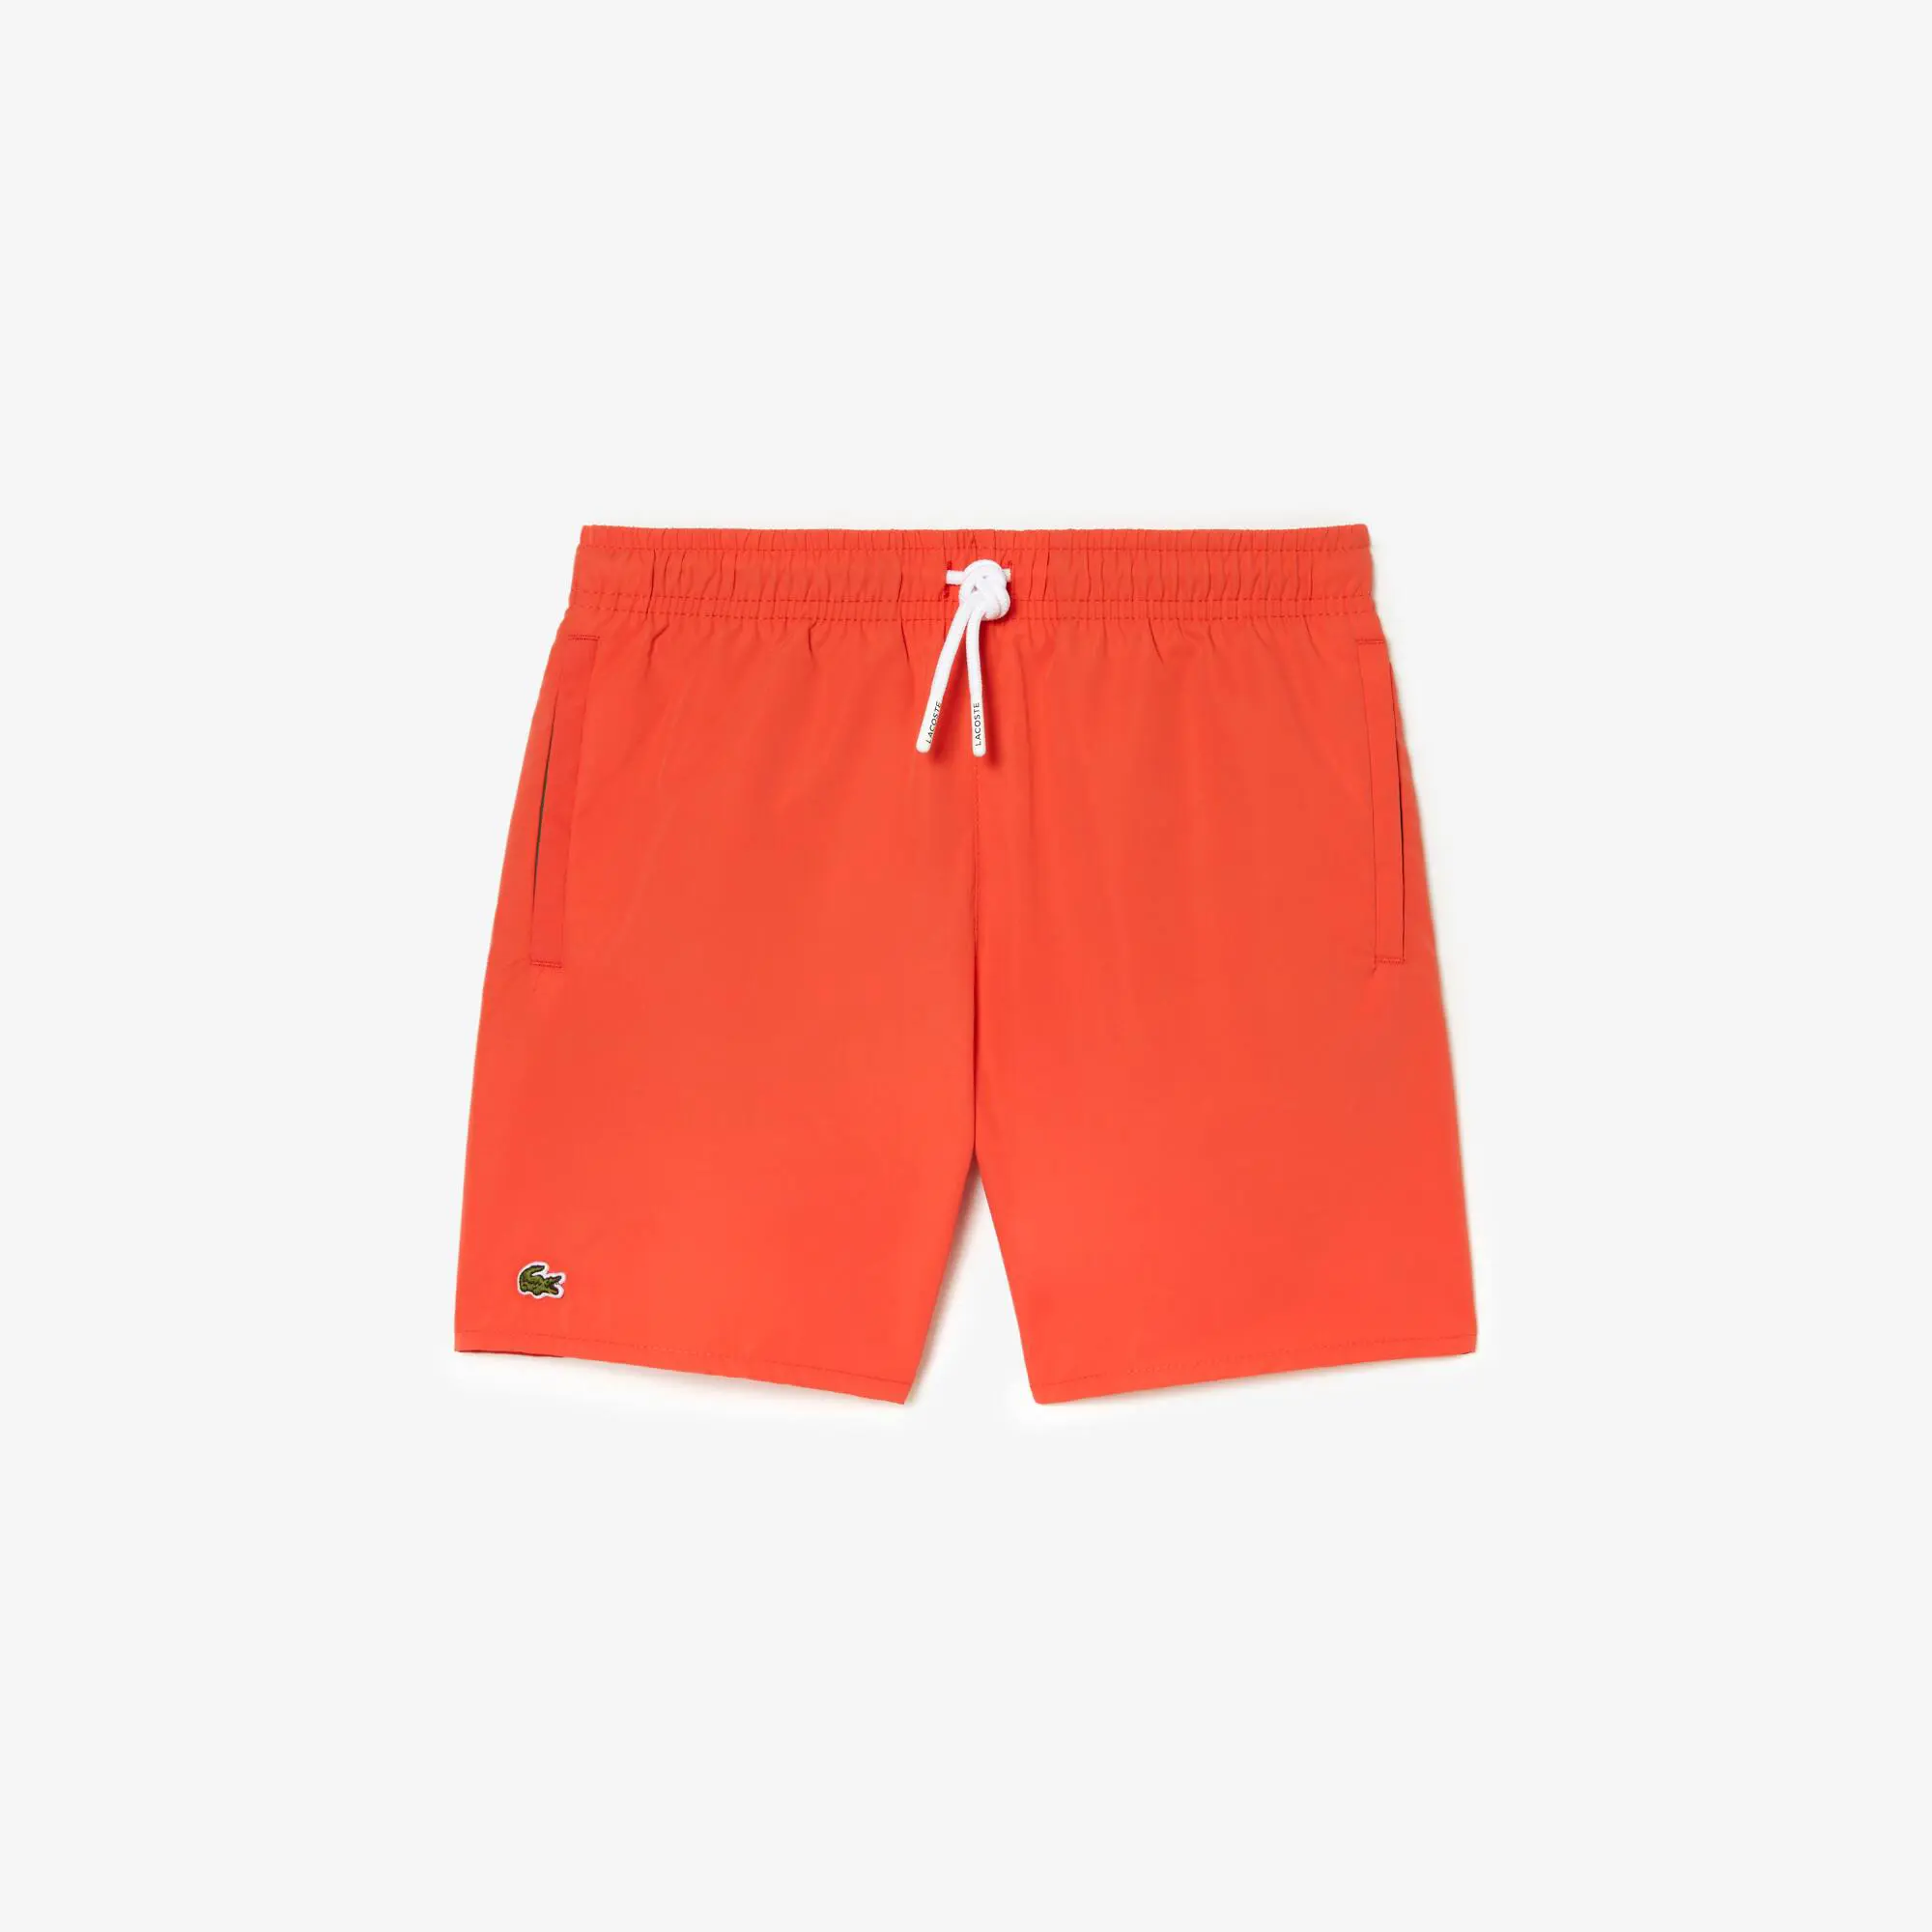 Lacoste Boys' Quick-Dry Solid Swim Shorts. 2